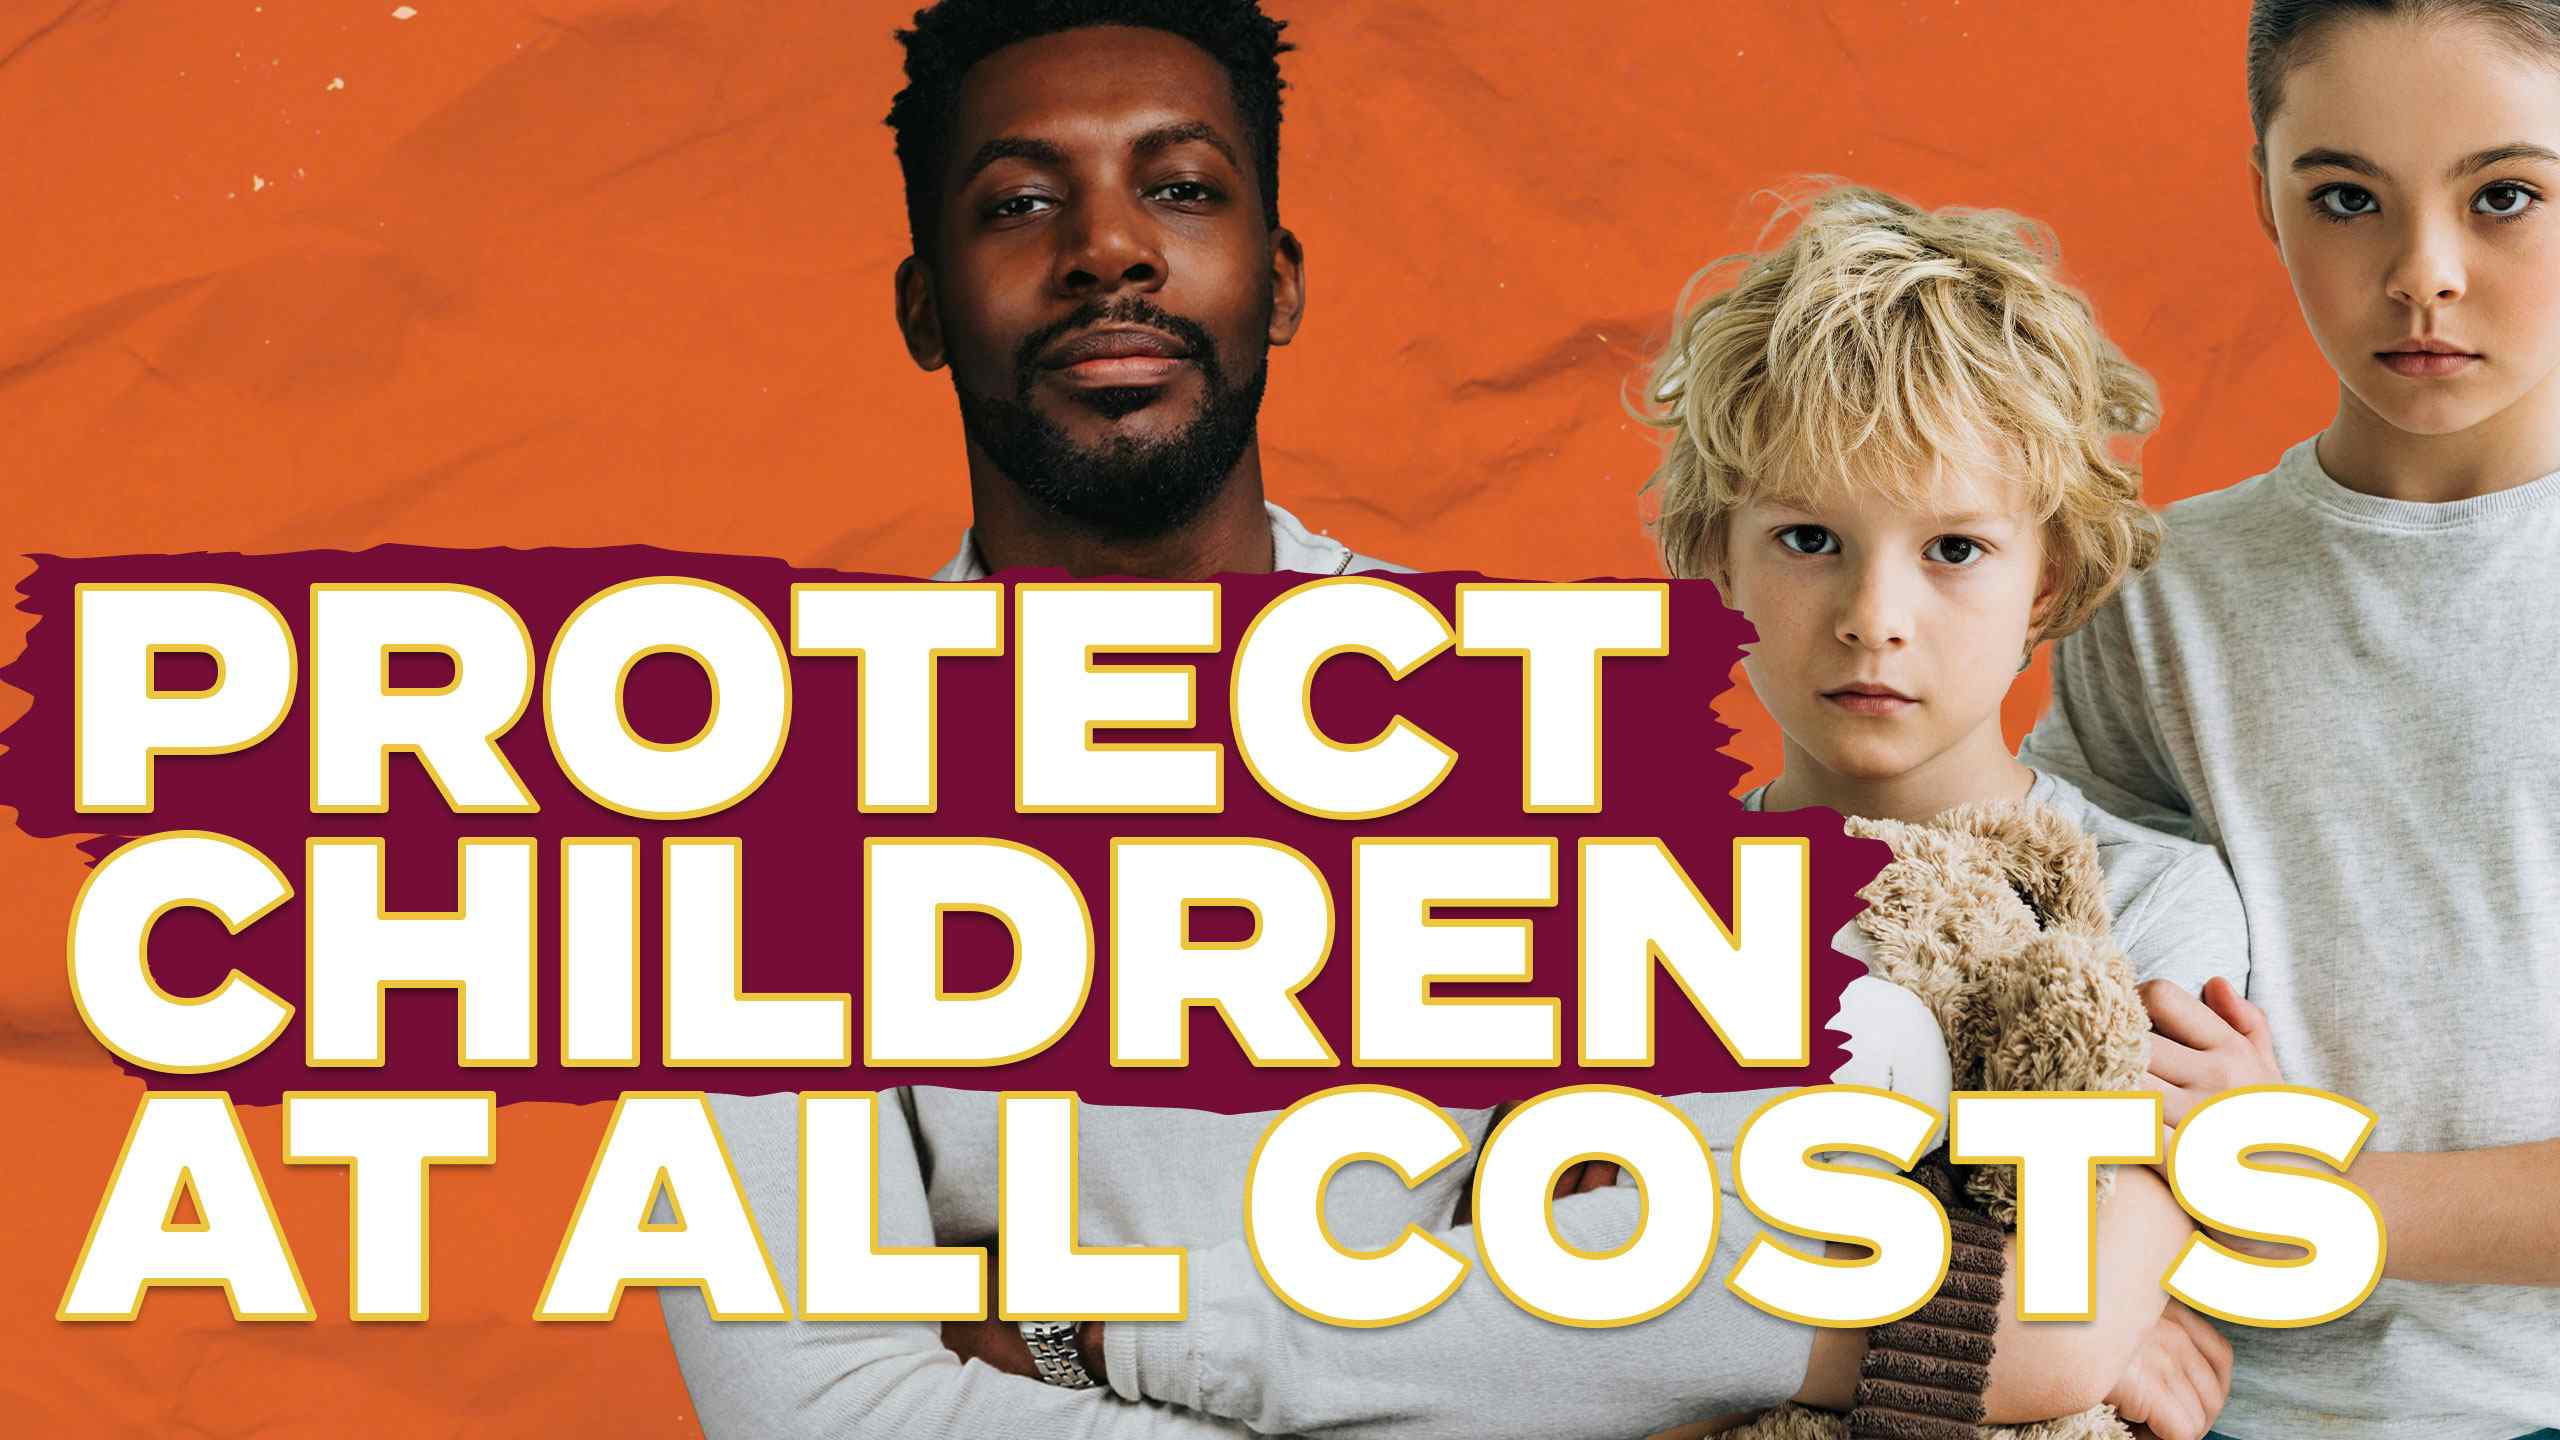 Xaviaer DuRousseau on Protecting Children at All Costs